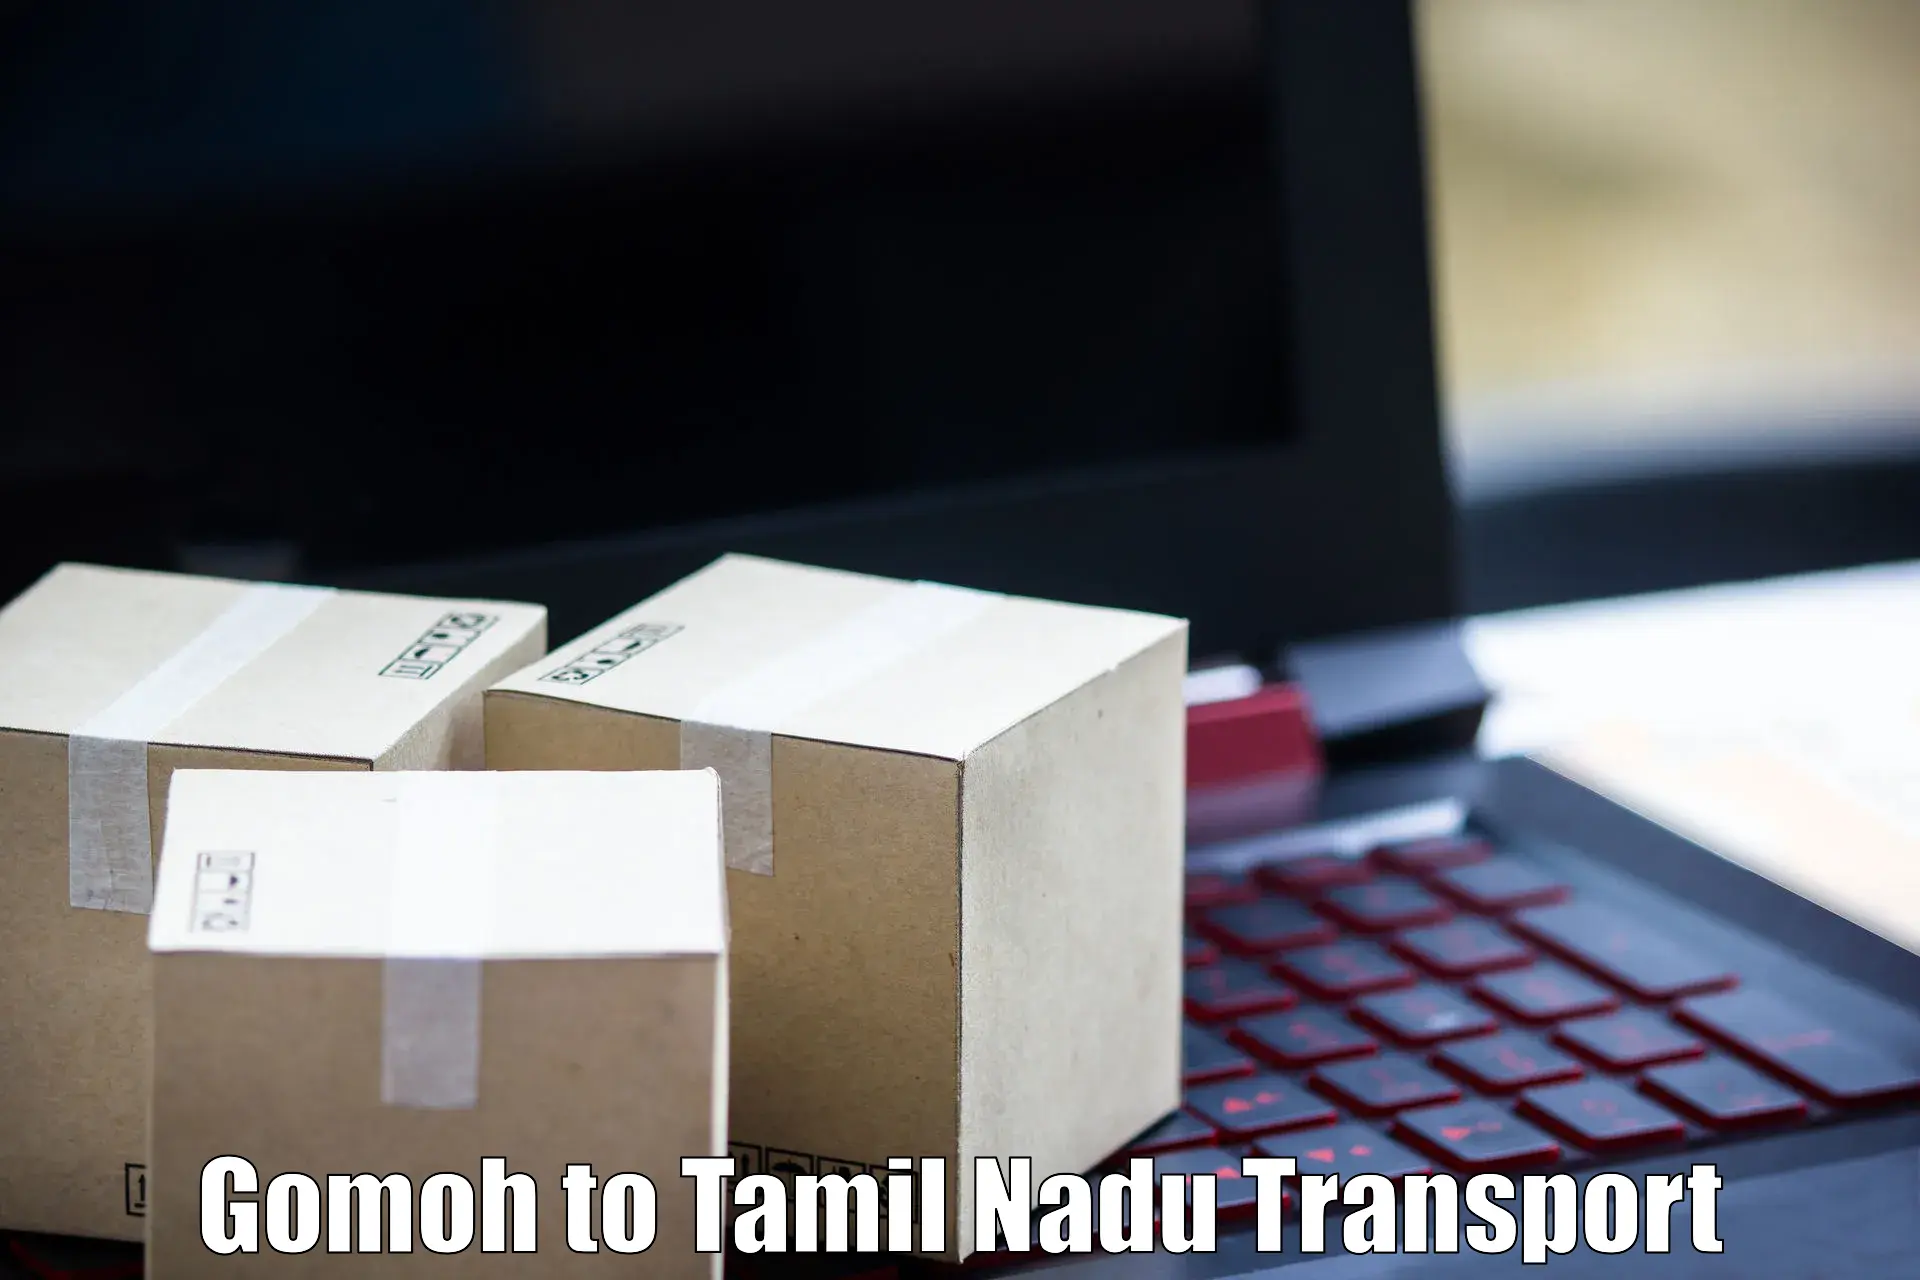 Parcel transport services Gomoh to Ennore Port Chennai